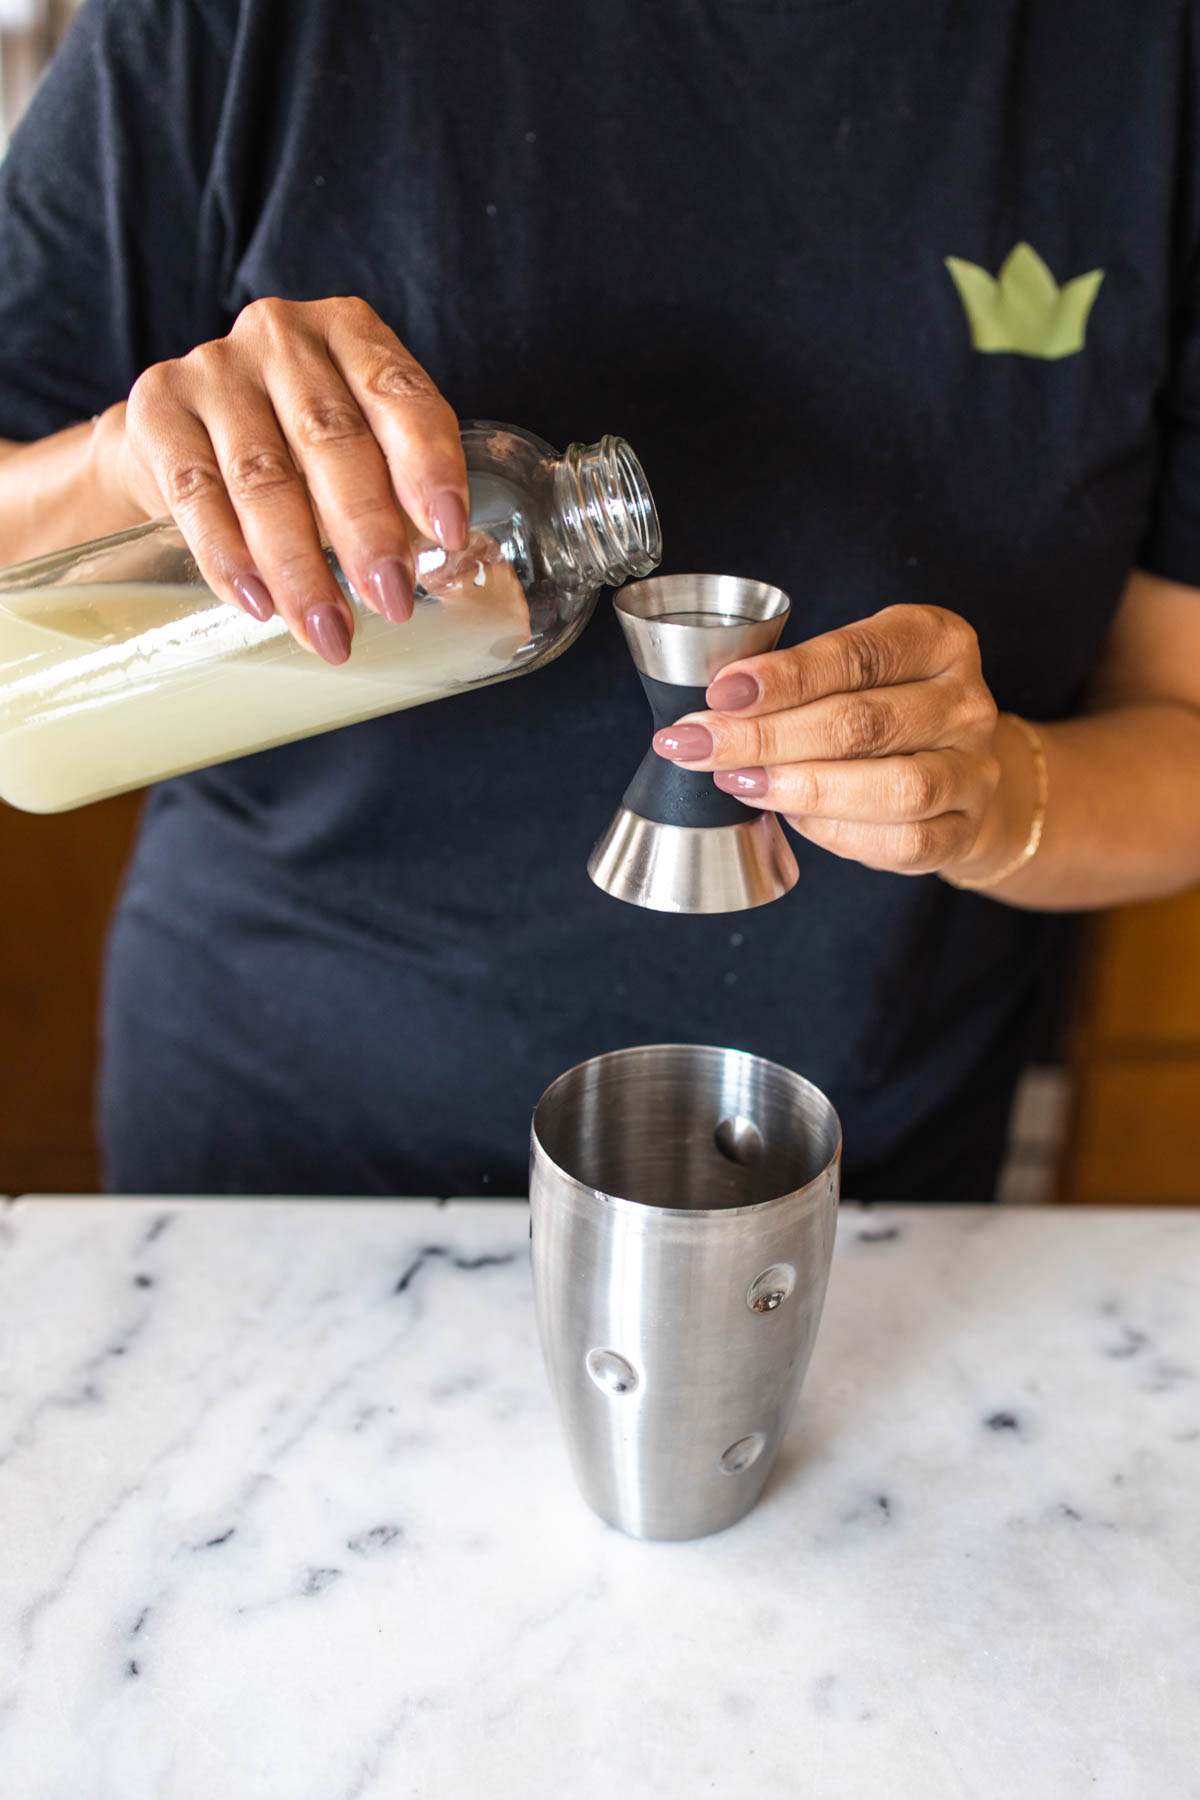 A person pouring some pineapple juice into a jigger behind a cocktail shaker on a marbled counter.